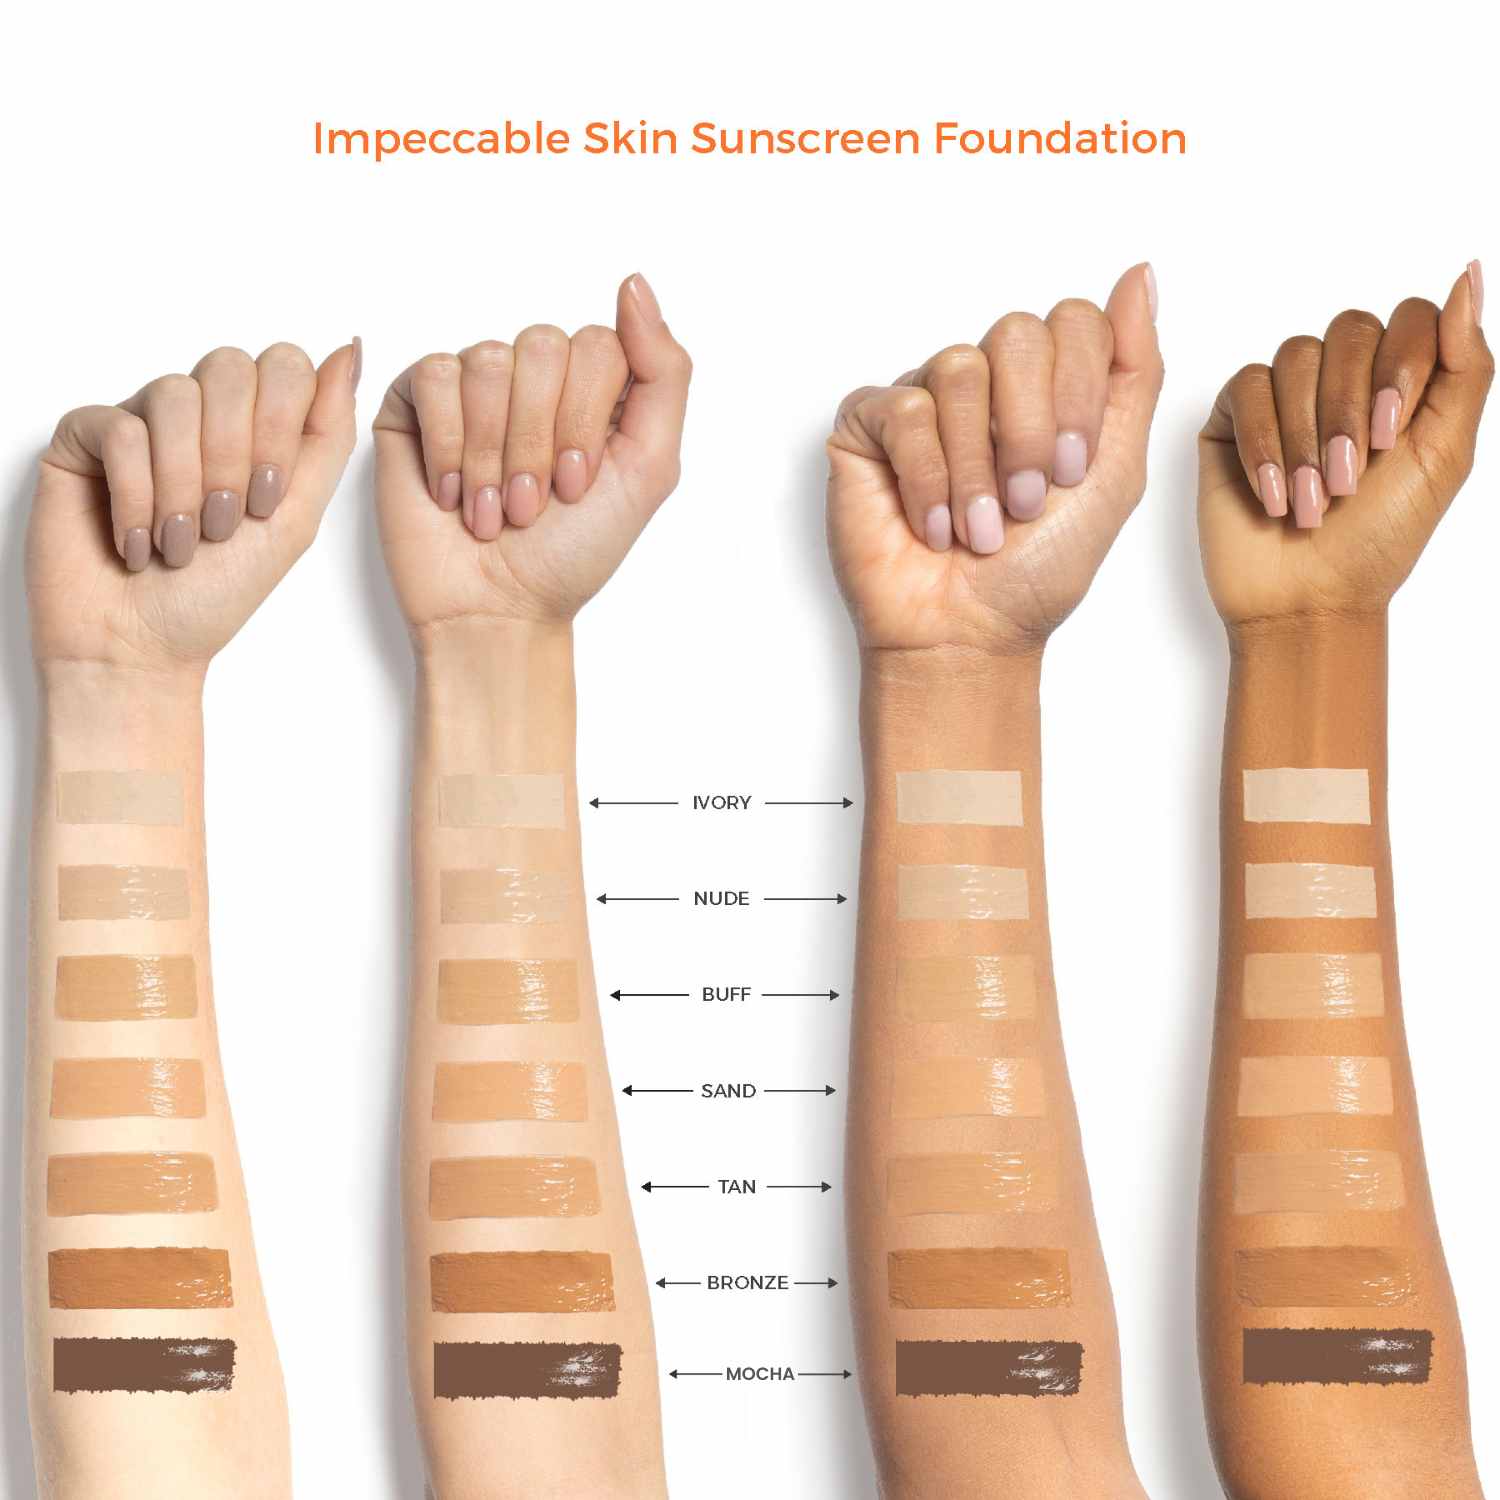 
  
  Suntegrity Impeccable Skin Sunscreen Foundation Swatches
  
